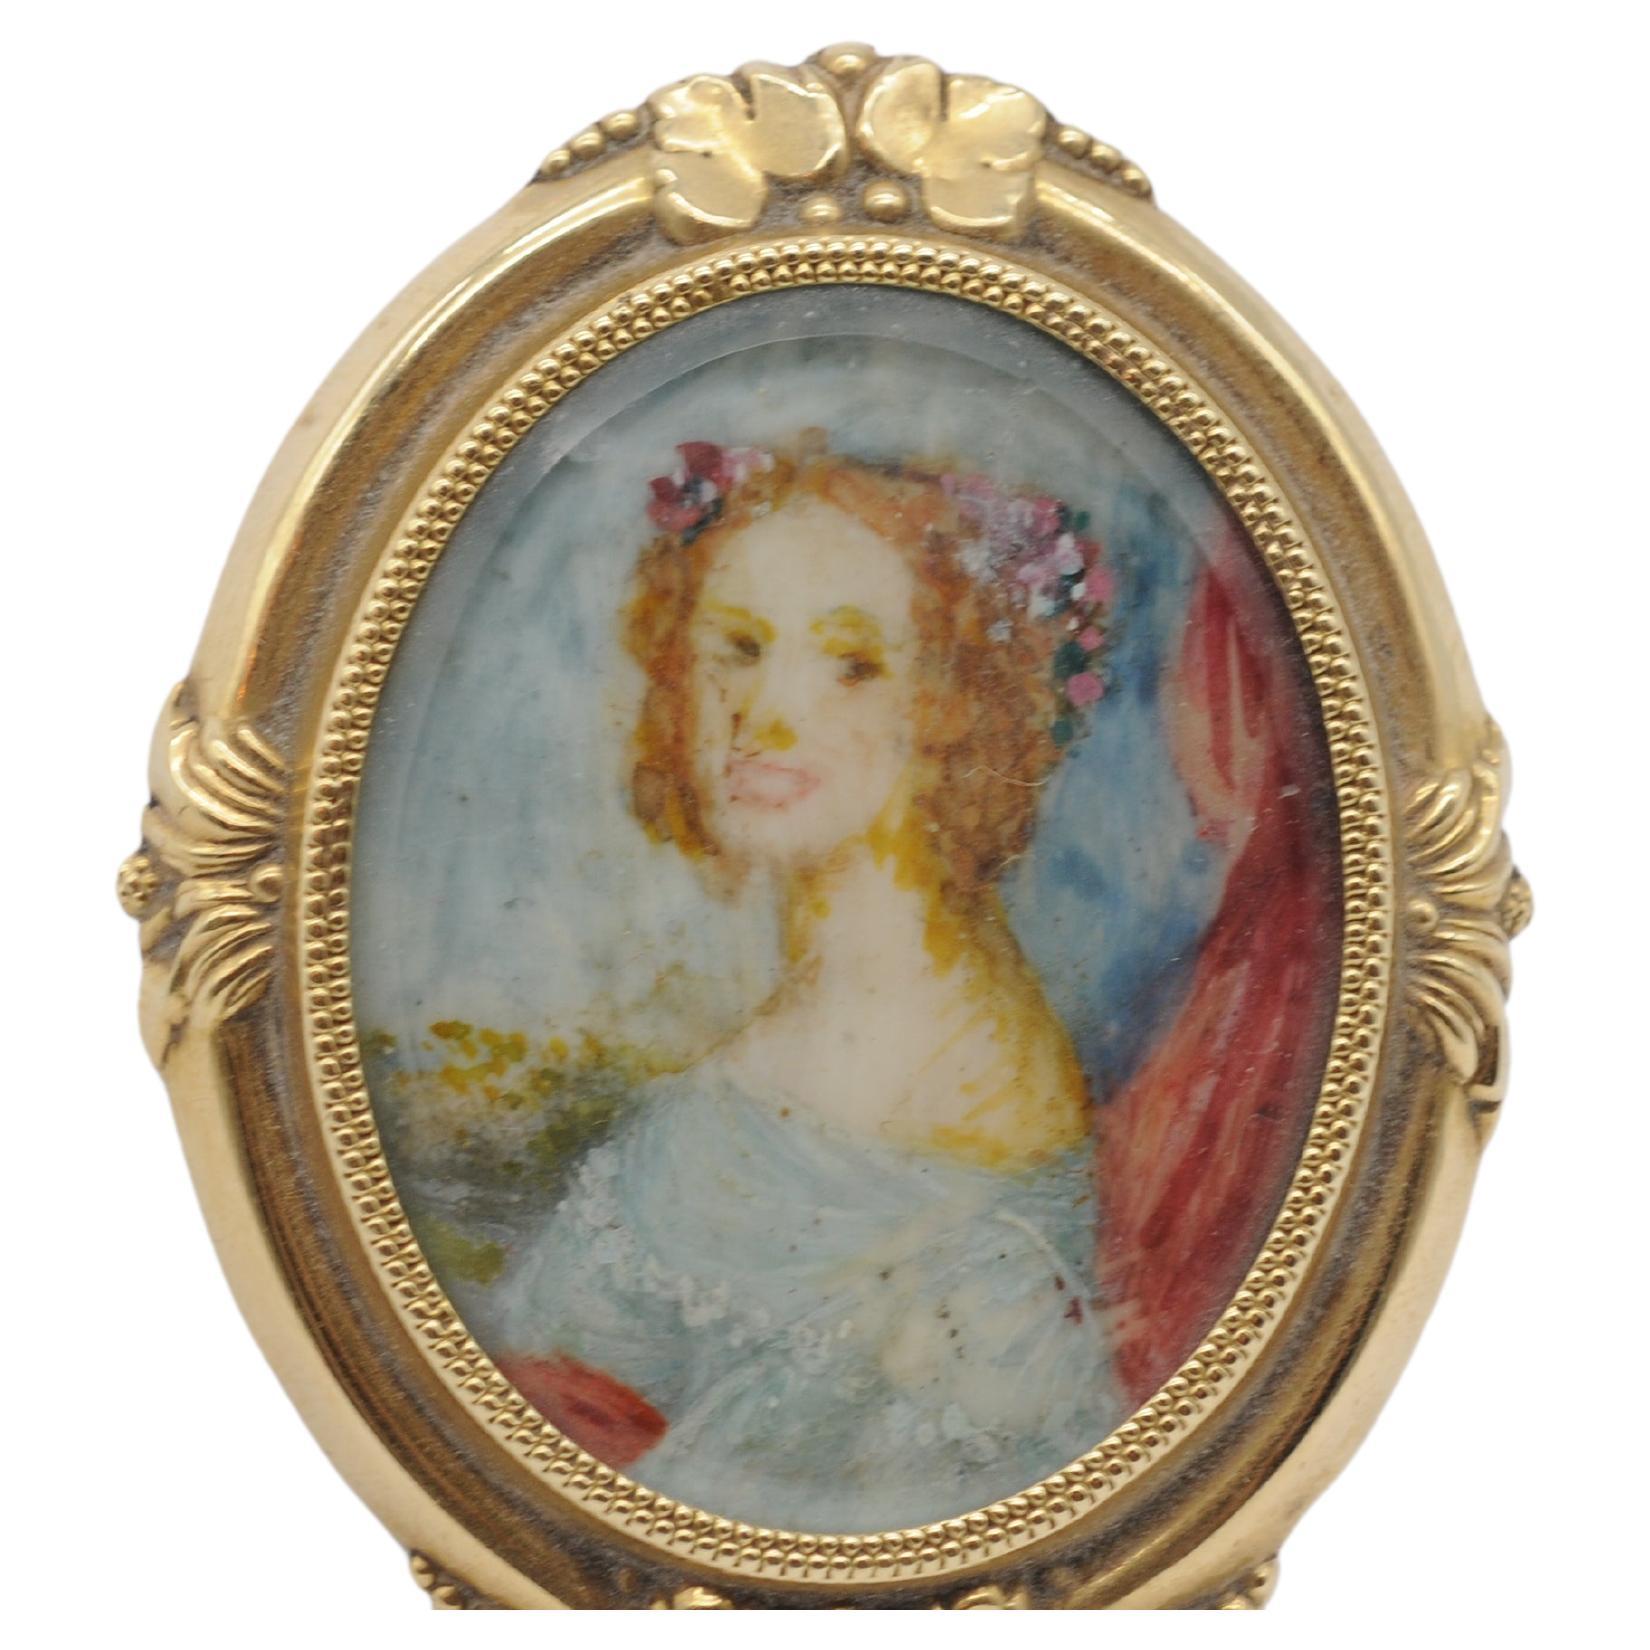 Biedermeir brooch 14k gold with a view of a woman For Sale 3